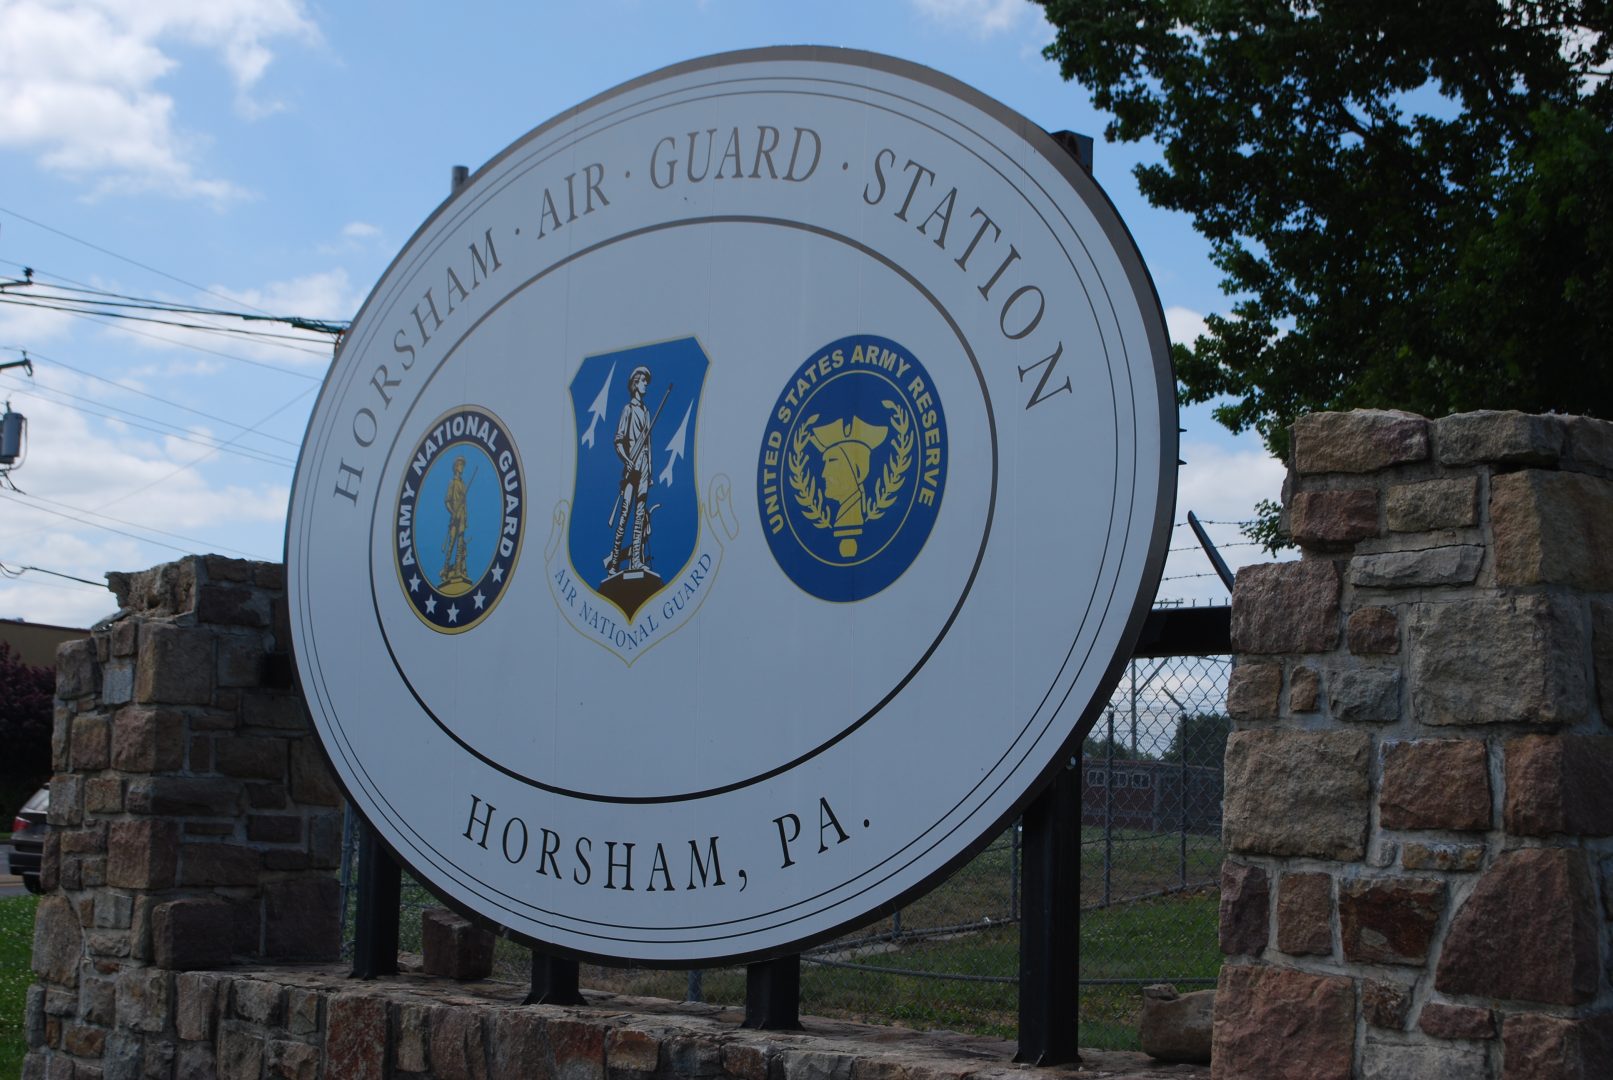 The Horsham Air Guard Station in Bucks County, Pa. where the use of PFAS chemicals in firefighting foam has been linked with contamination of local water supplies. 